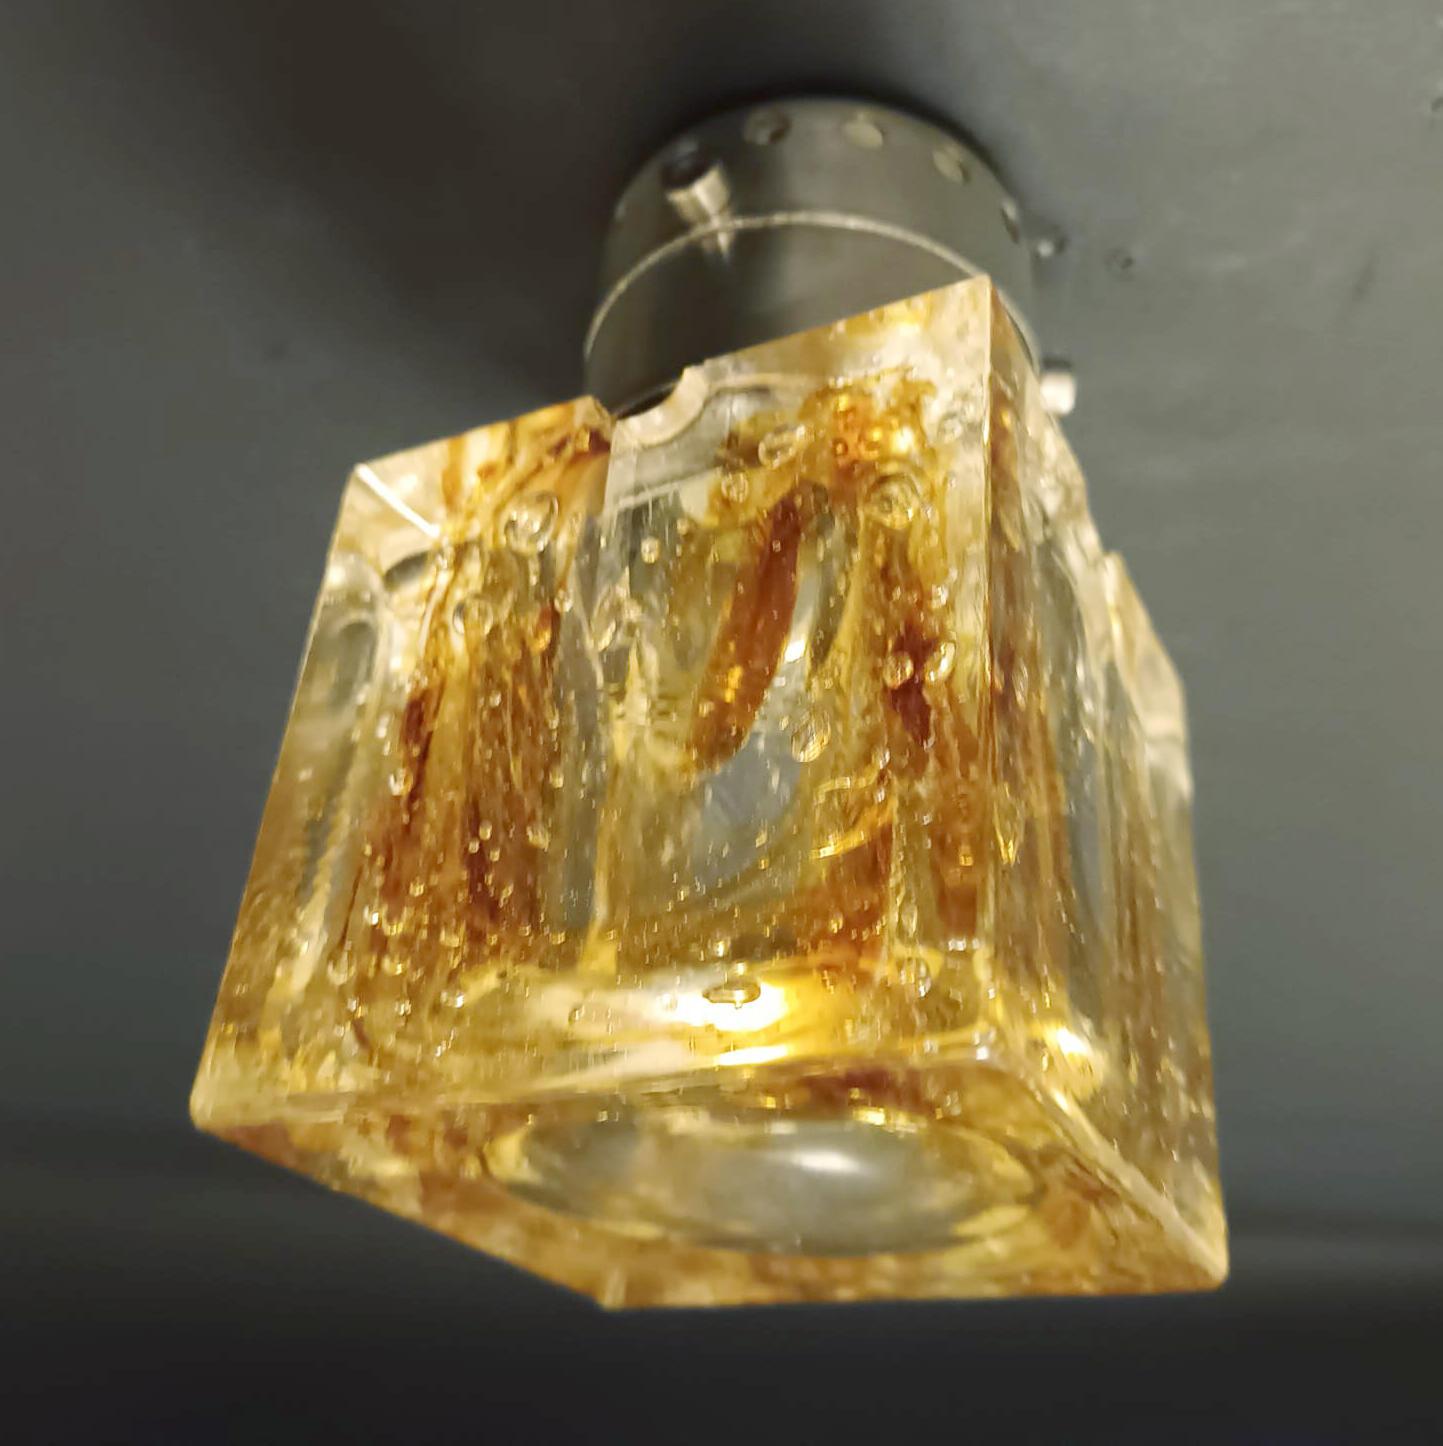 Vintage Italian spot light which can be used as a wall light or flush mount, with a single amber cubic Murano glass shade hand blown with bubbles inside the glass using bollicine technique, mounted on nickel frame / Made in Italy by Sciolari, circa